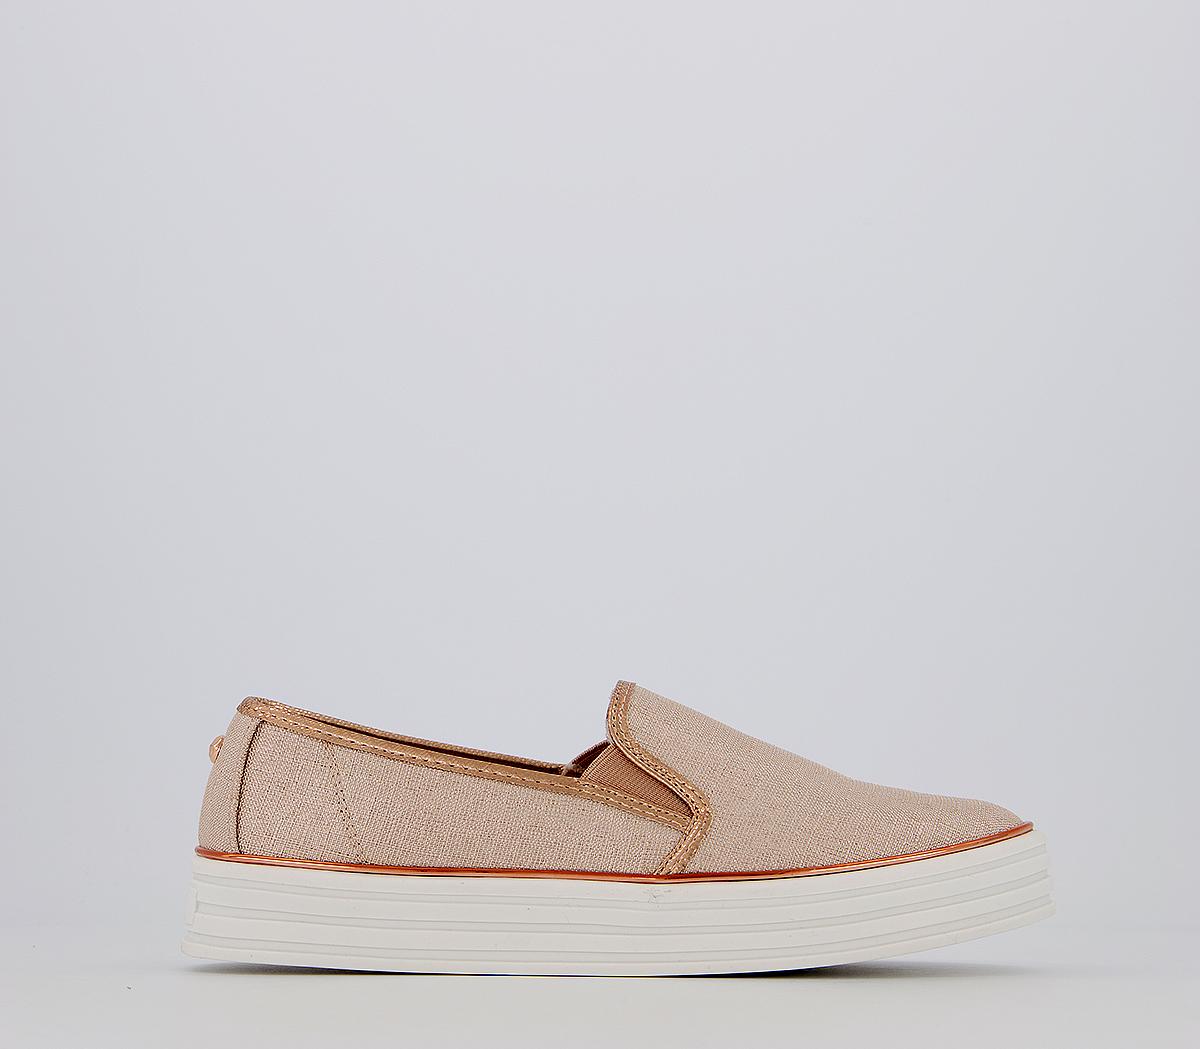 Office Feel Good Slip On Trainers Nude Rose Gold Metallic Mix - Flat ...